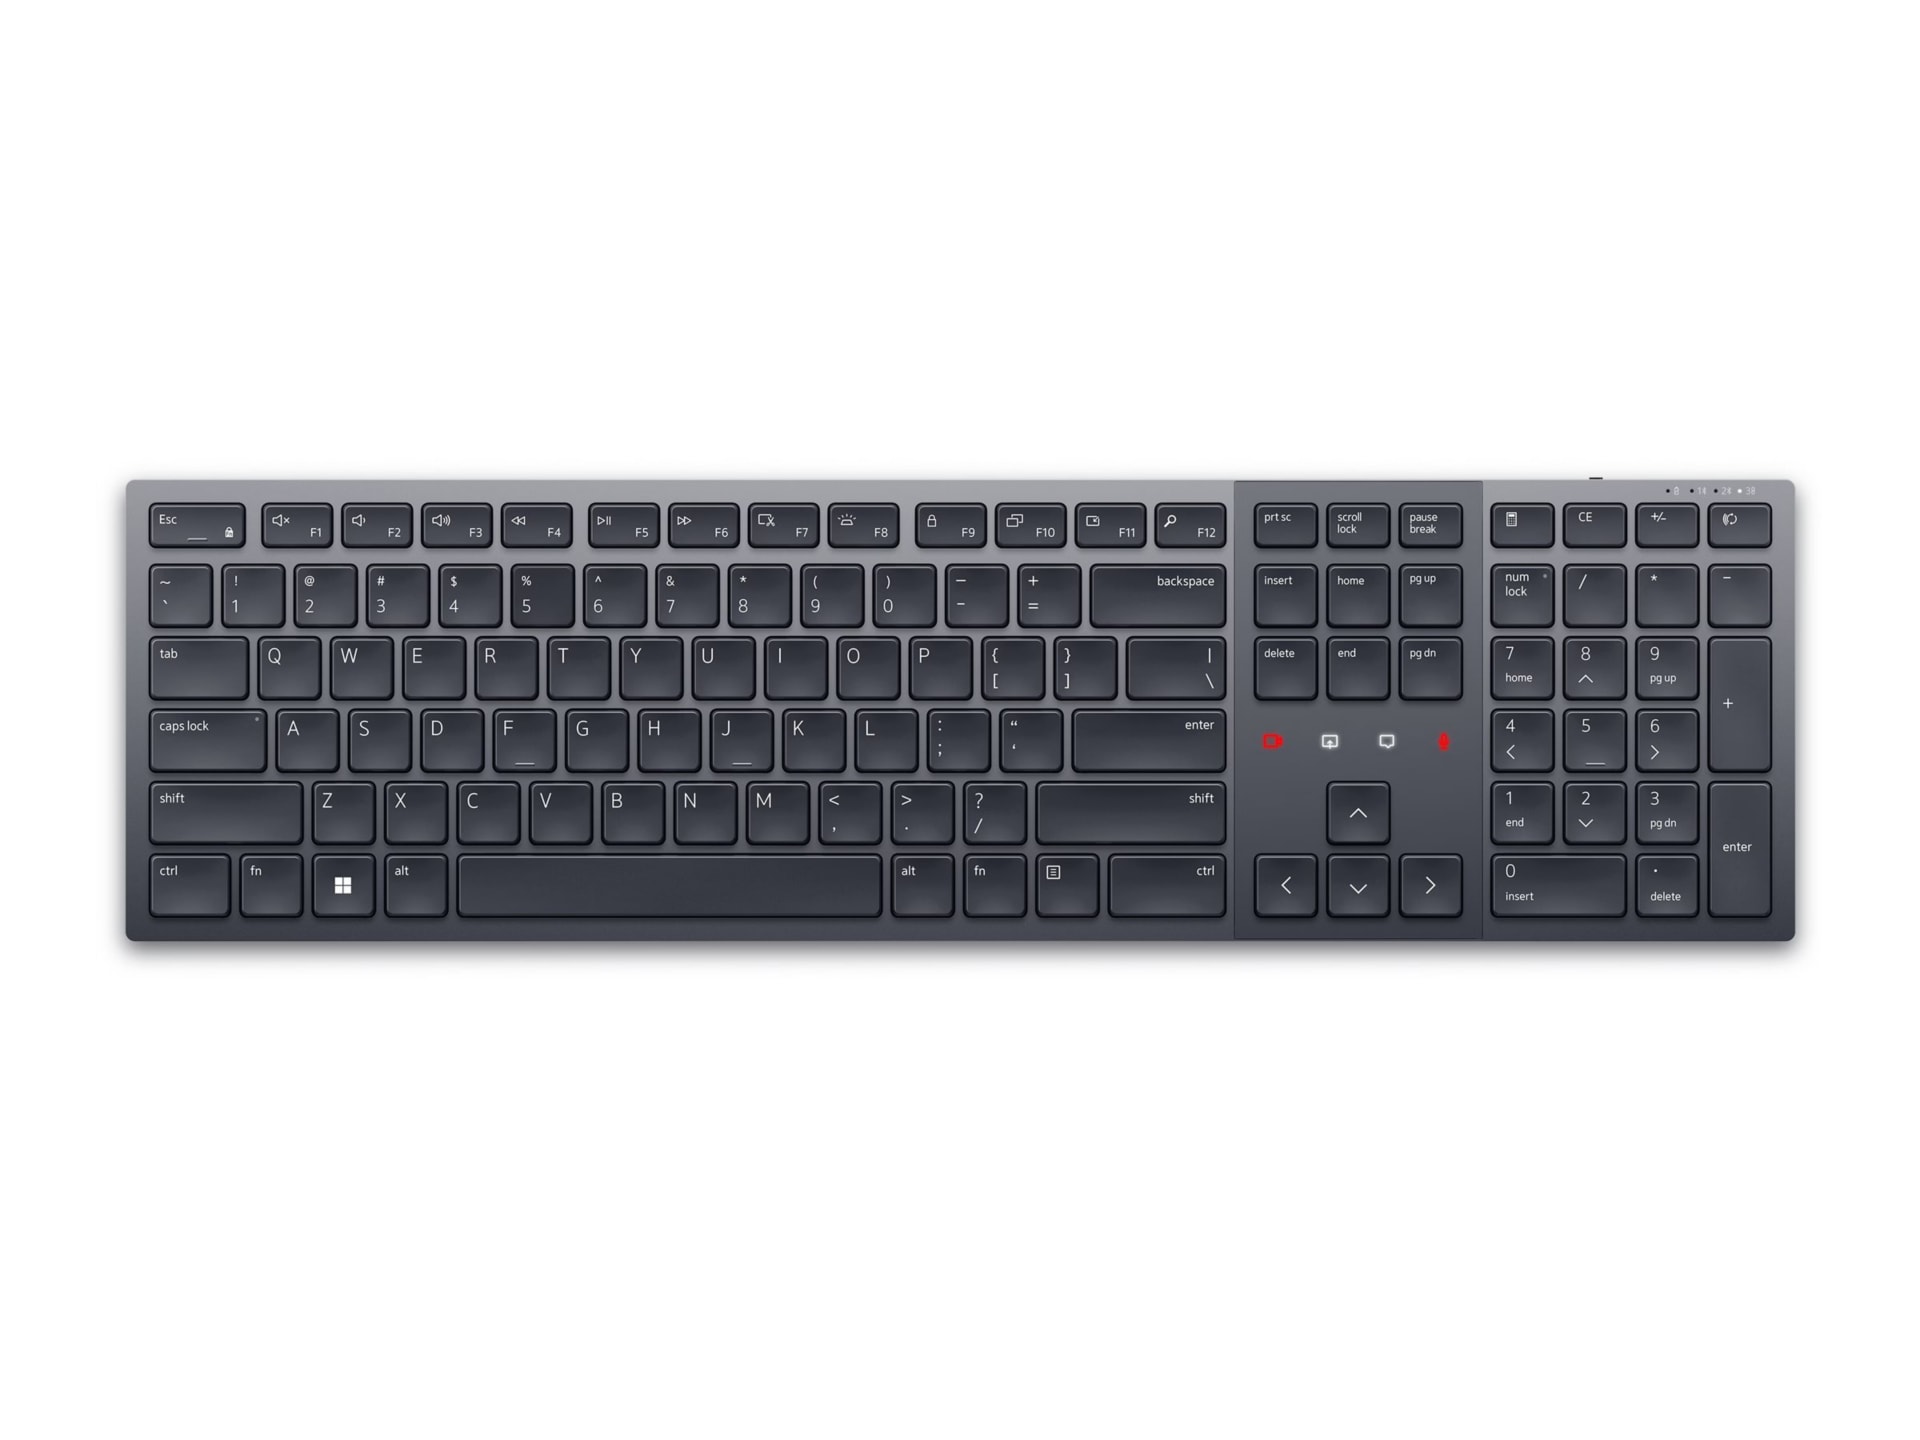 Dell KB900 Premier Collaboration Keyboard Review